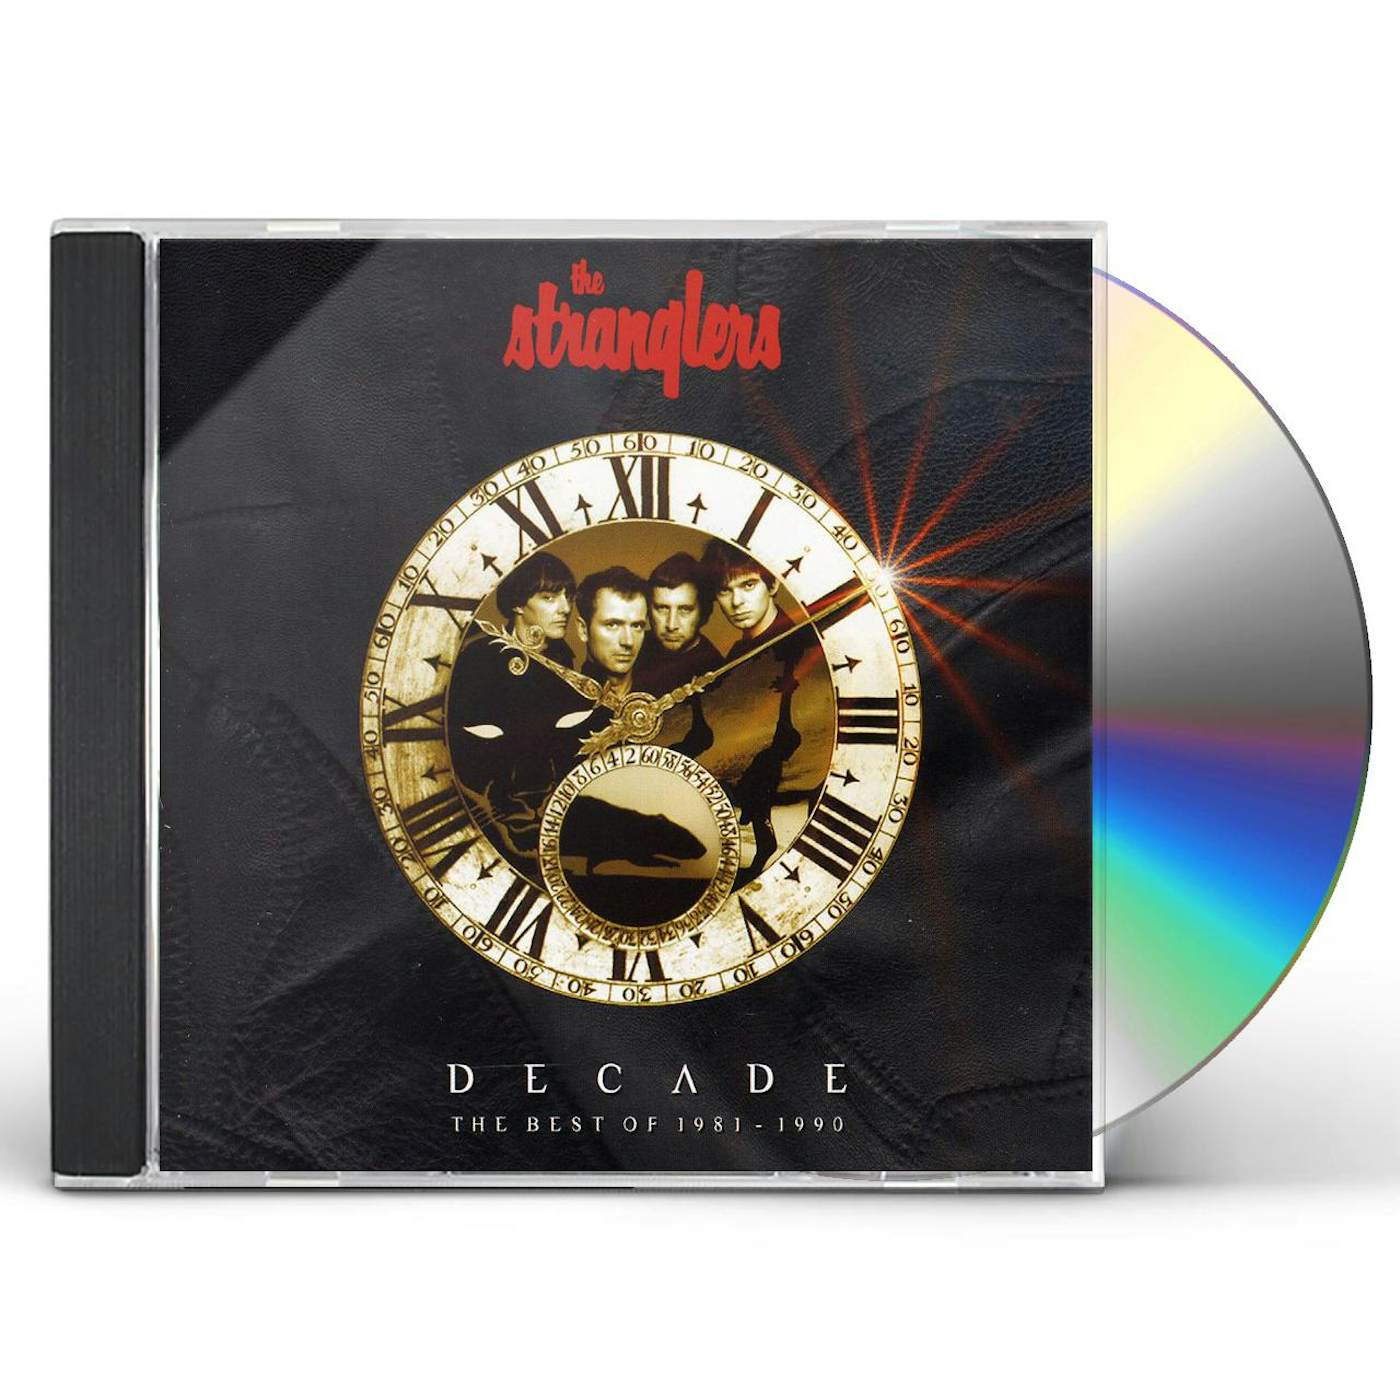 The Stranglers DECADE: BEST OF 1981-1990 CD